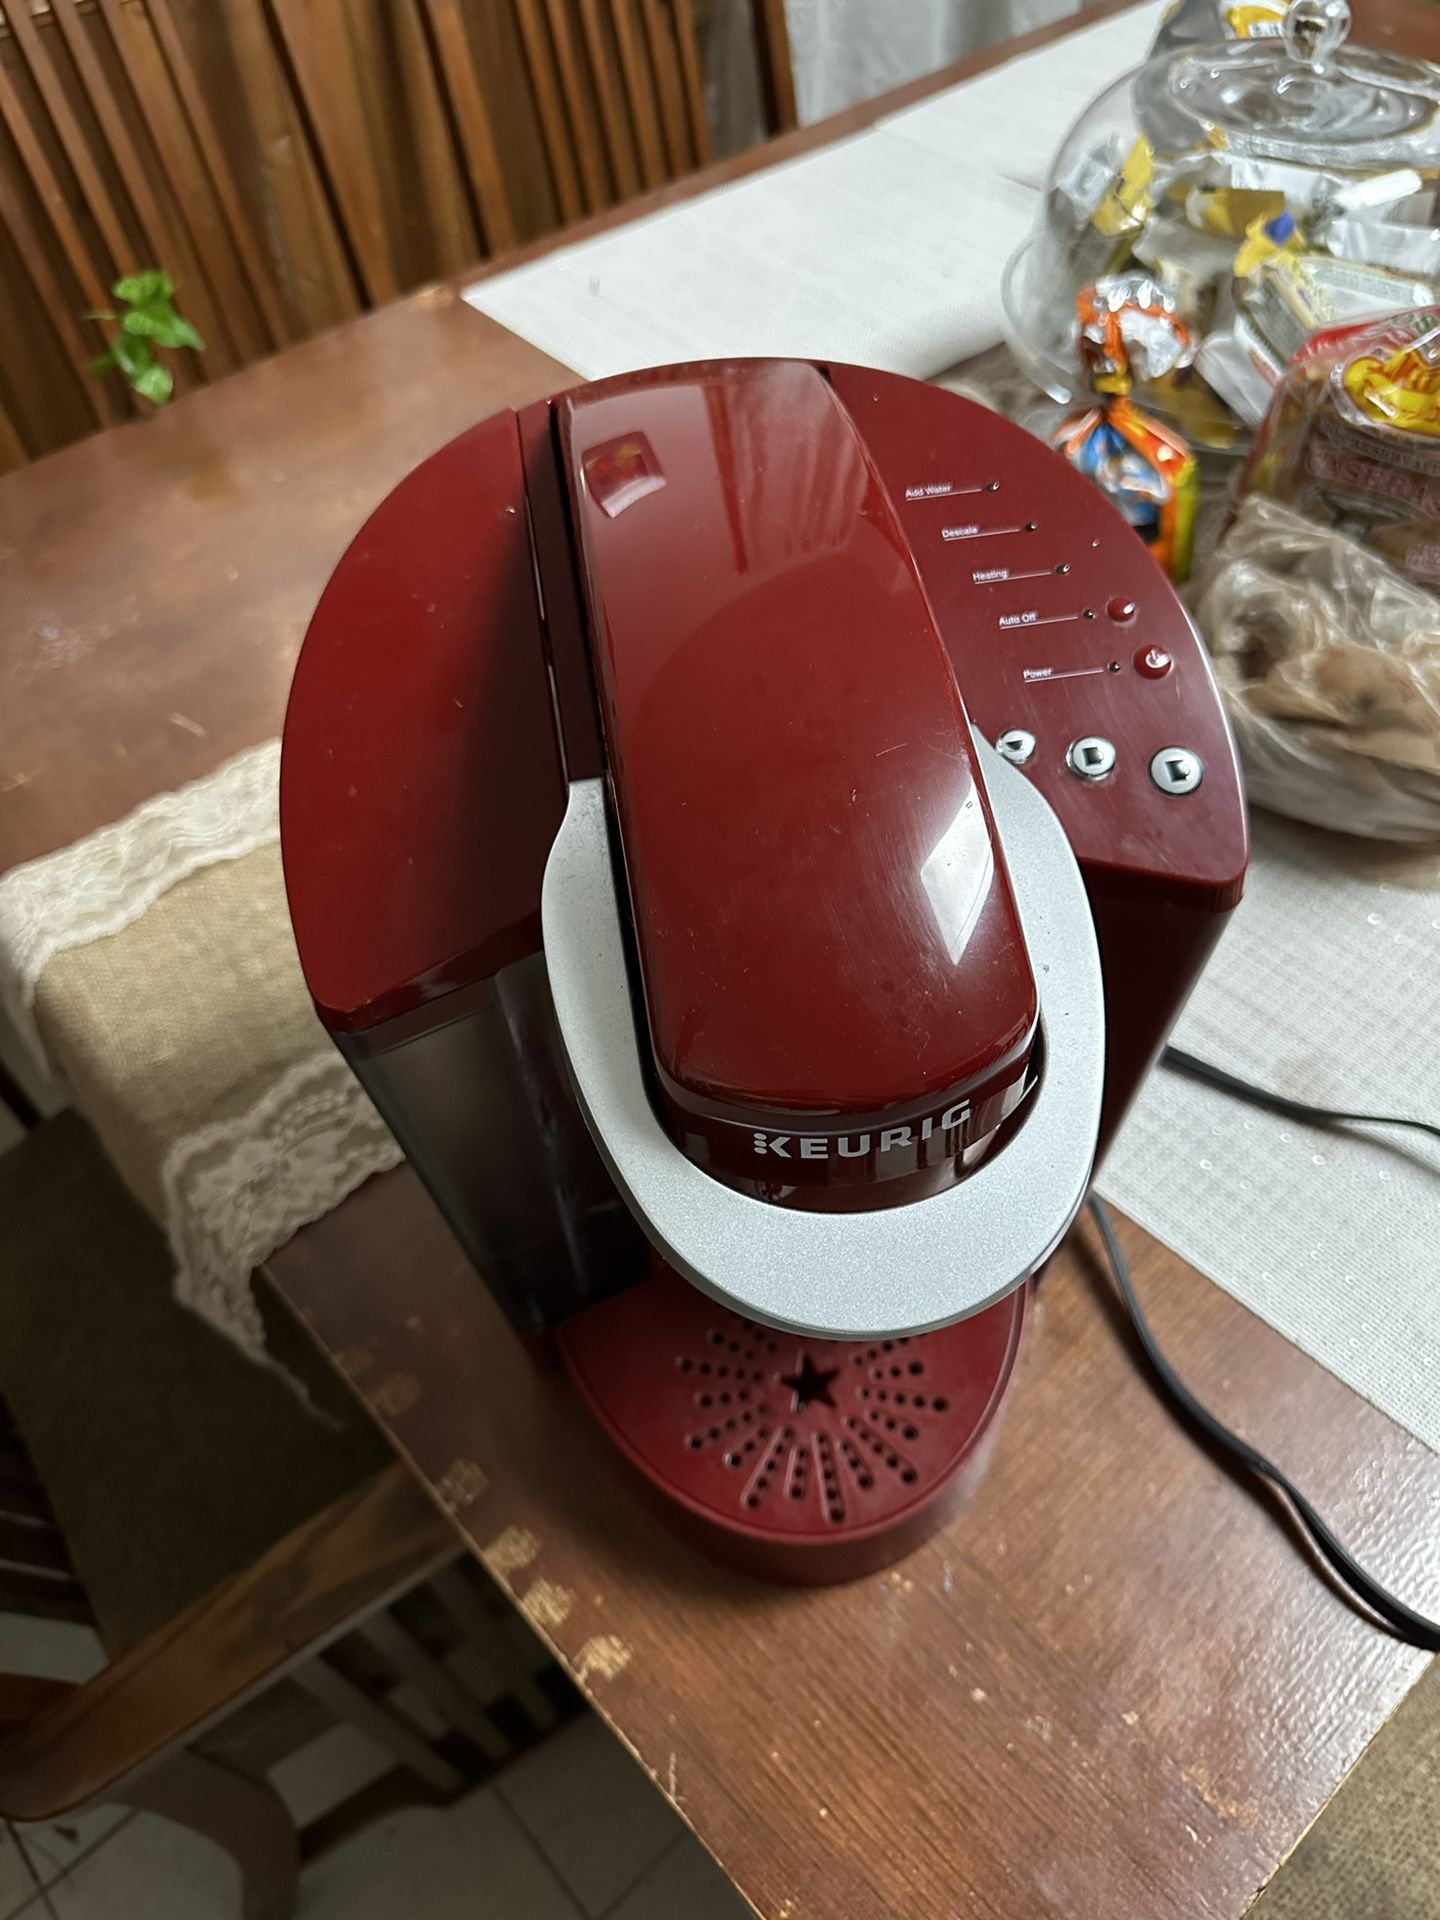 KitchenAid KCM402 Personal Coffee Maker for Sale in Boca Raton, FL - OfferUp